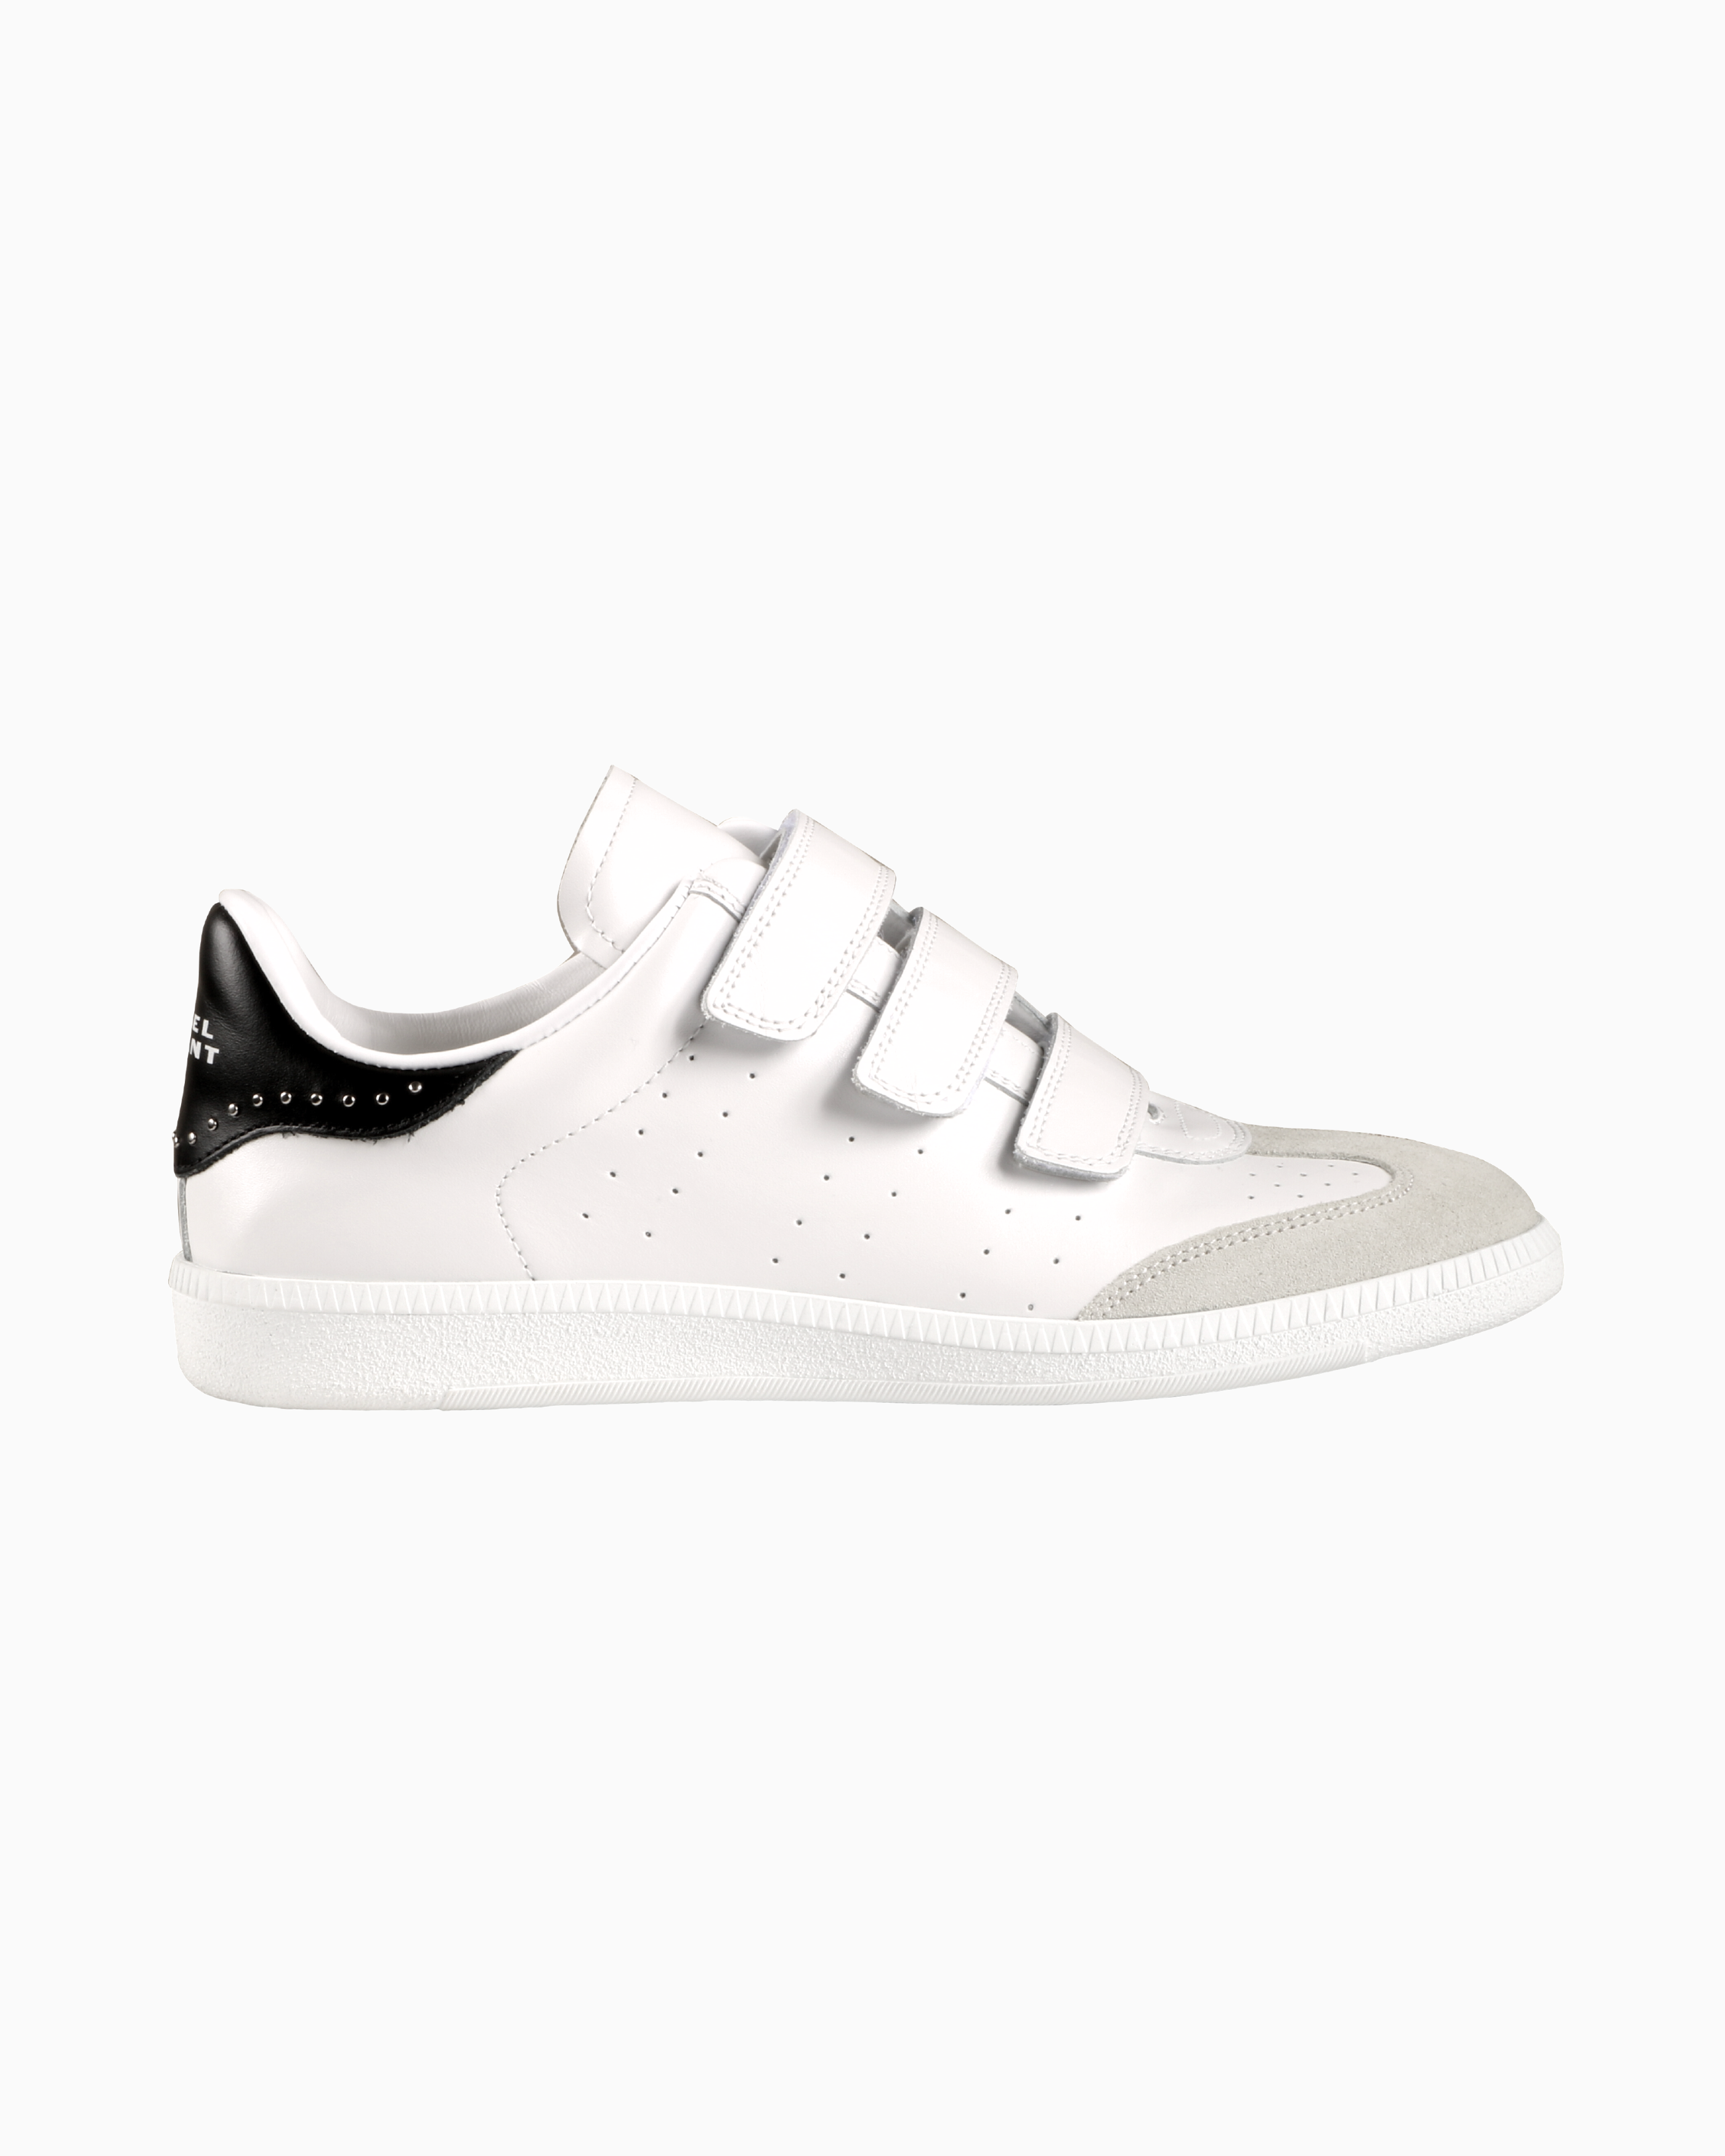 Isabel Marant Beth Sneakers in Black Studded Classic